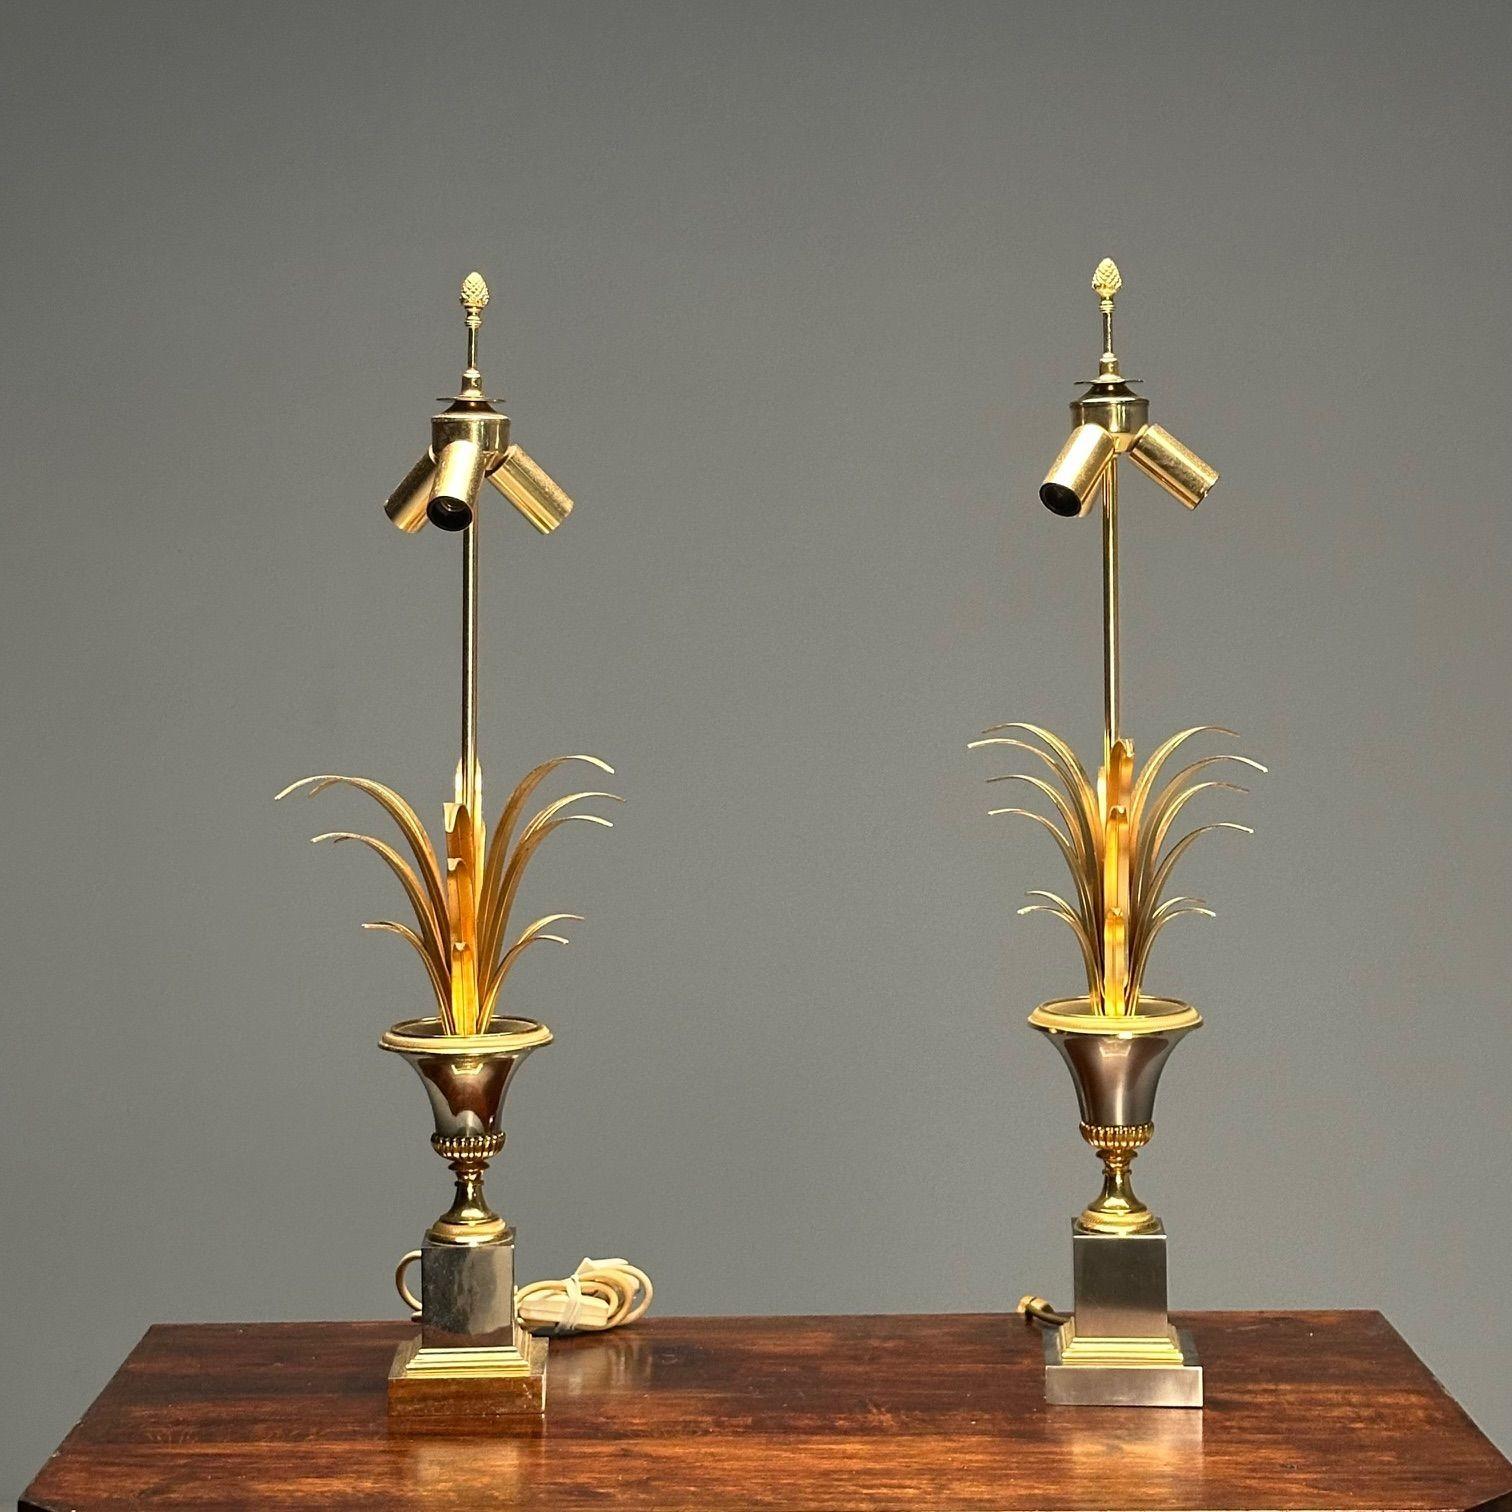 Maison Charles Attr, Jansen Style, Hollywood Regency, French Table Lamps, France, 1950s

Pair of 'Vase Roseaux' French palm-shaped table lamps attributed to Maison Chales et Fils and produced in France in the later half of the 20th century.